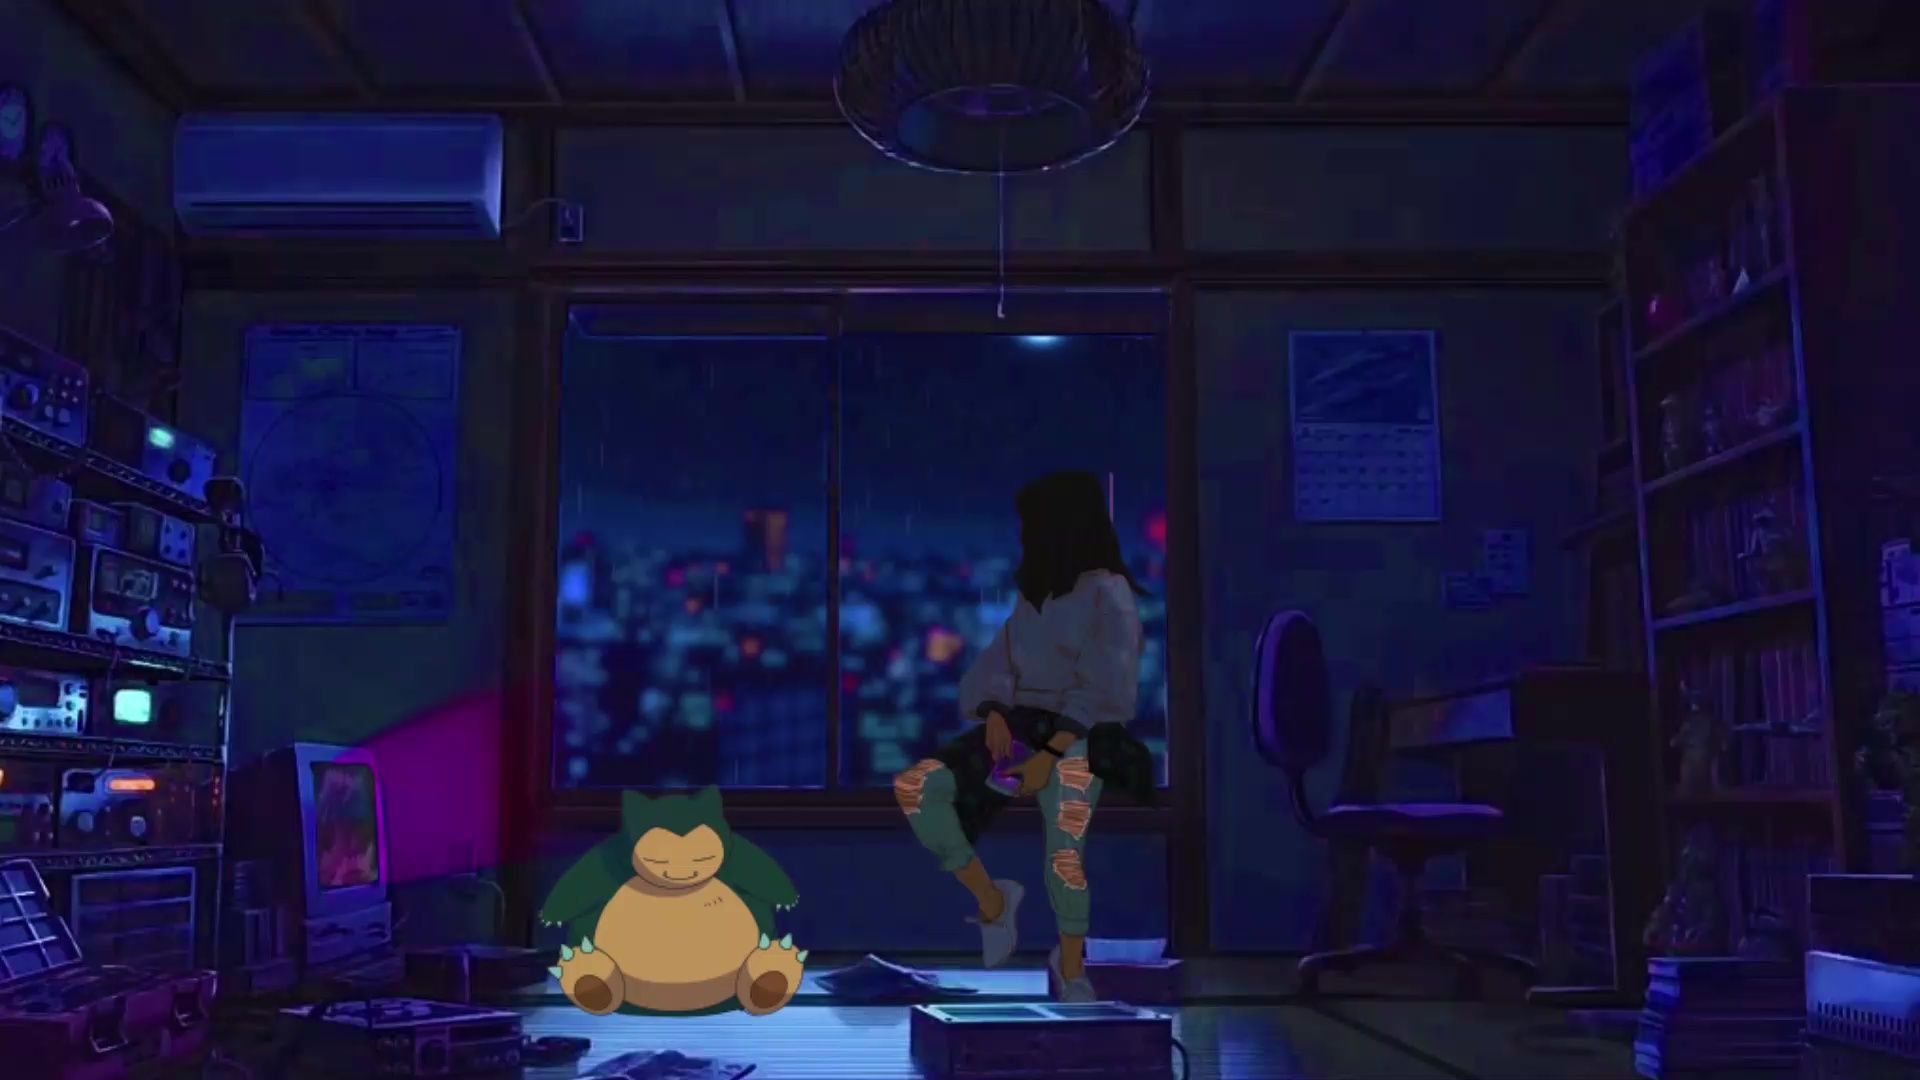 A girl sits on her bed in her room, reading a book. Snorlax is sitting on the floor next to her. - 1920x1080, Windows 10, computer